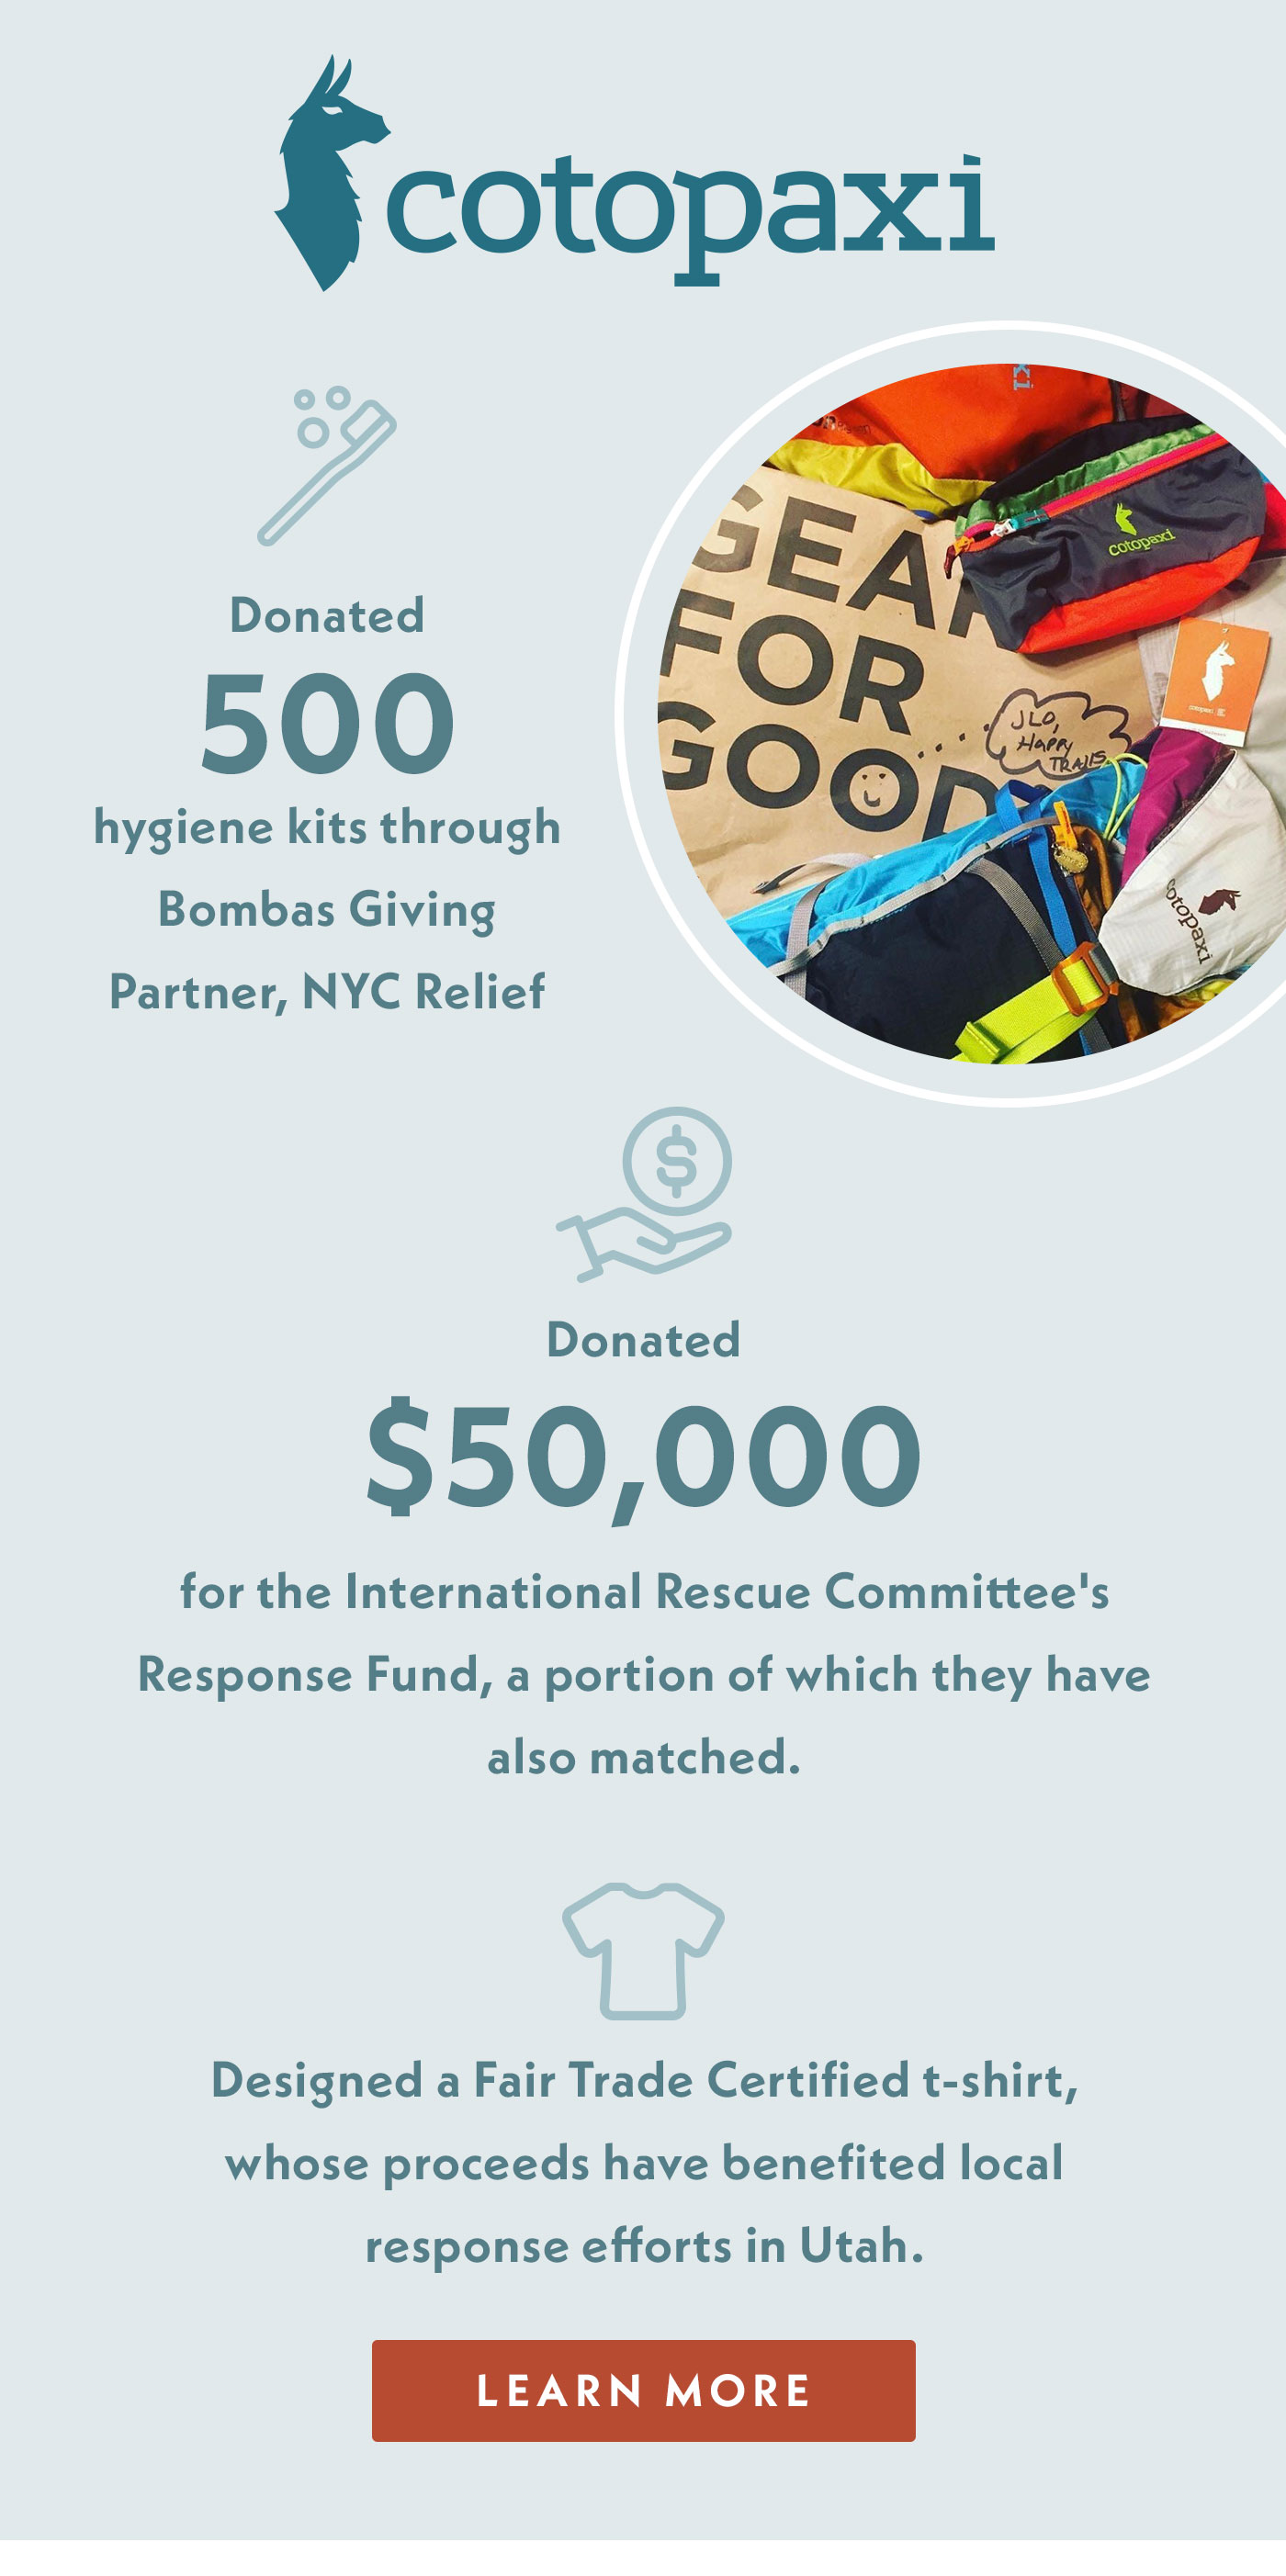 Cotopaxi donated 500 hygiene kits through Bombas Giving Partner, NYC Relief. They also donated $50,000 for the International Rescue Committee's Response Fund, a portion of which they have also matched. Cotopaxi designed a fair trade certified t-shirt, whose proceeds have benefited local response efforts in Utah.